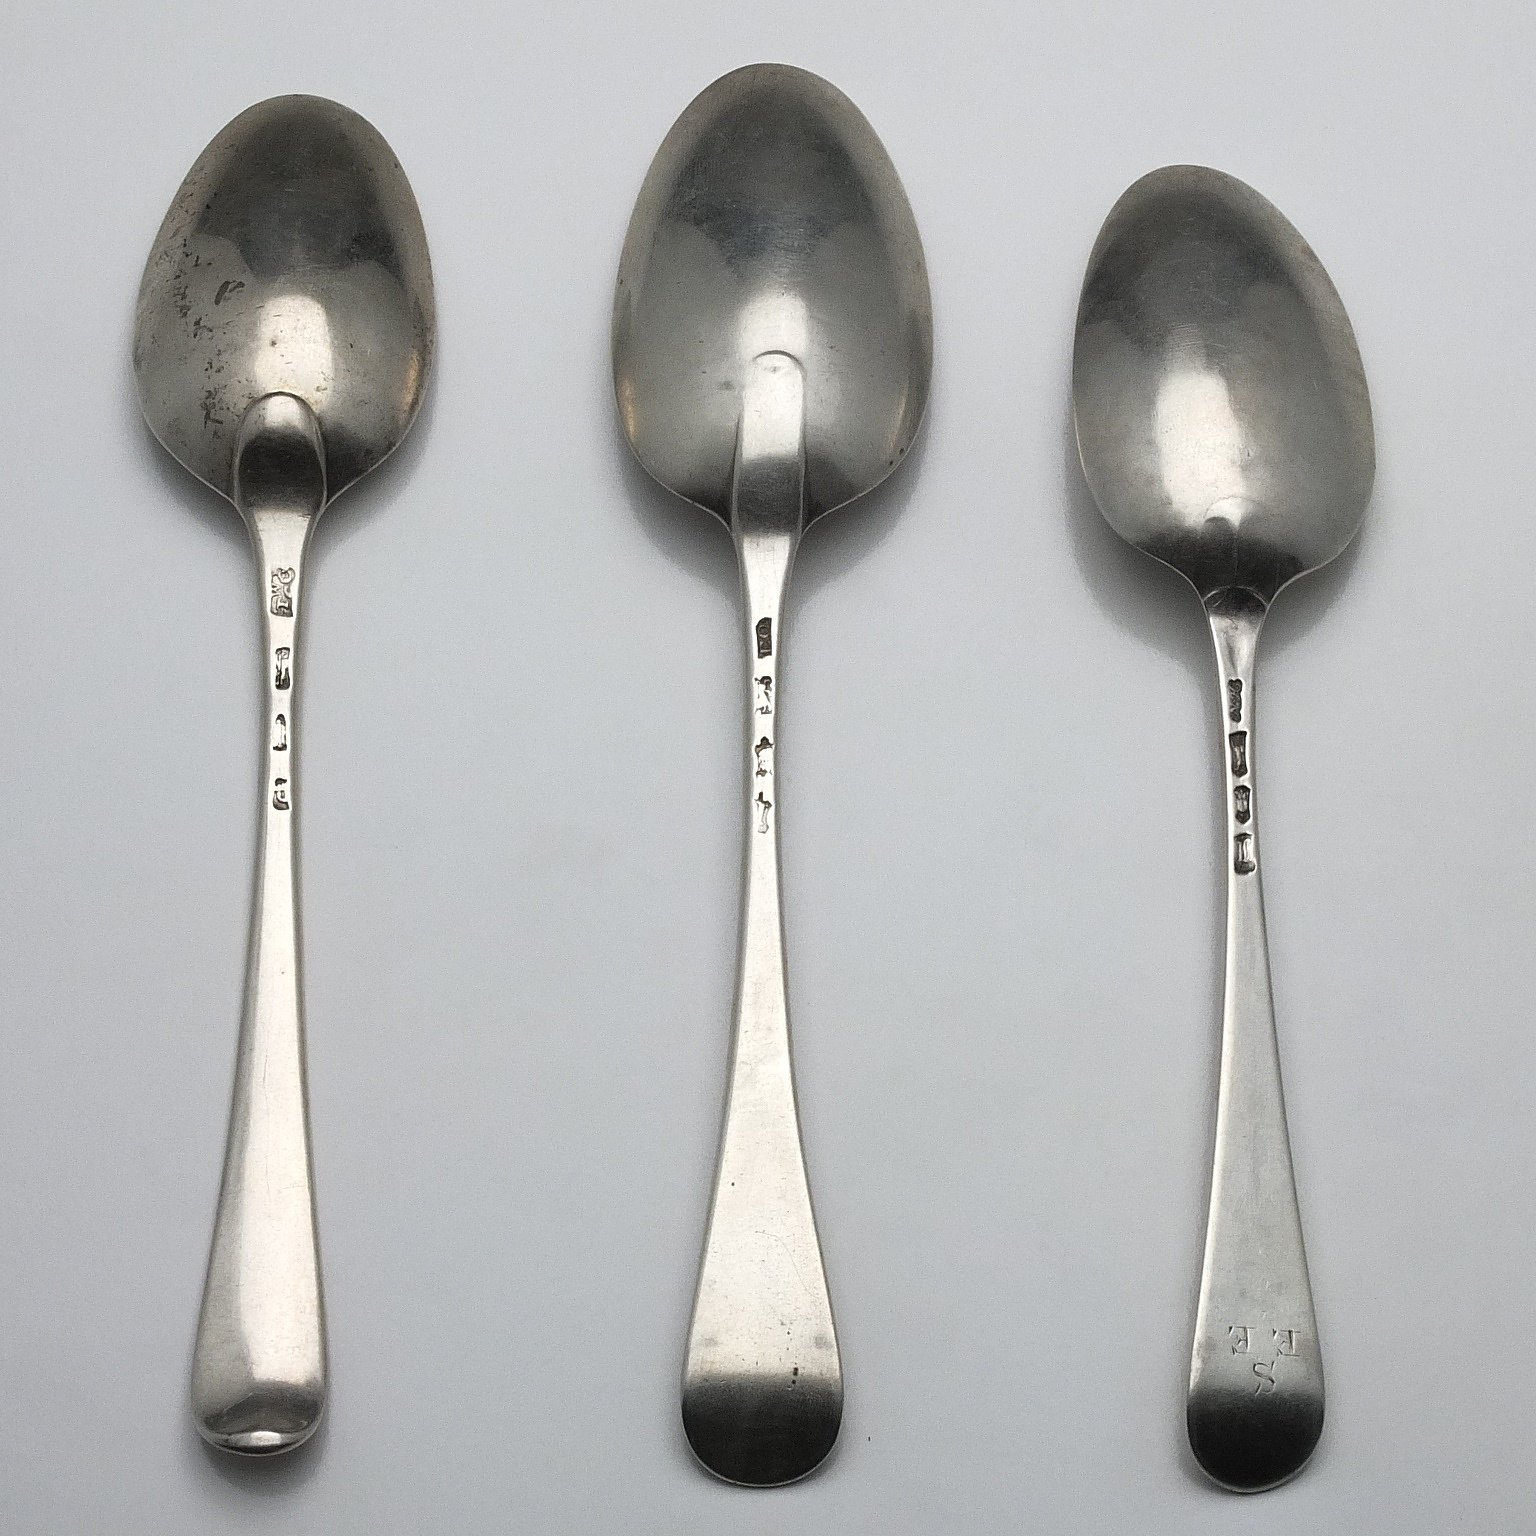 'Three Sterling Silver Table Spoons, Nicholas Hearnden London 1763, Thomas & William Chawner London 1770 and Elizabeth Oldfield London'